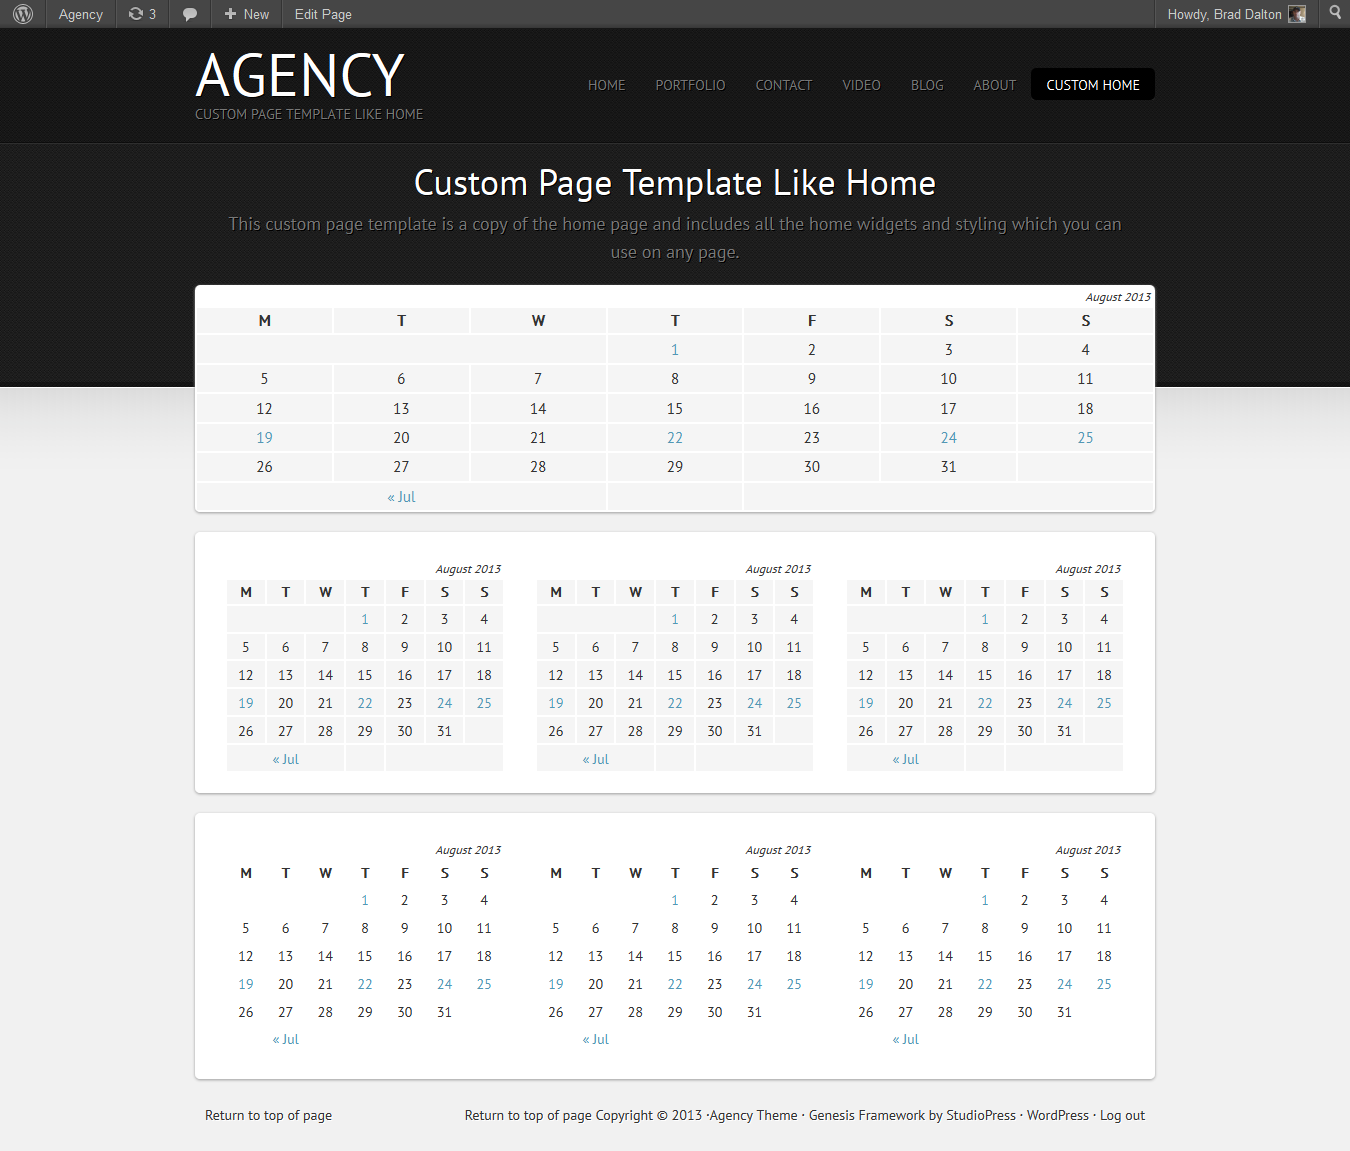 custom home page template for Agency theme